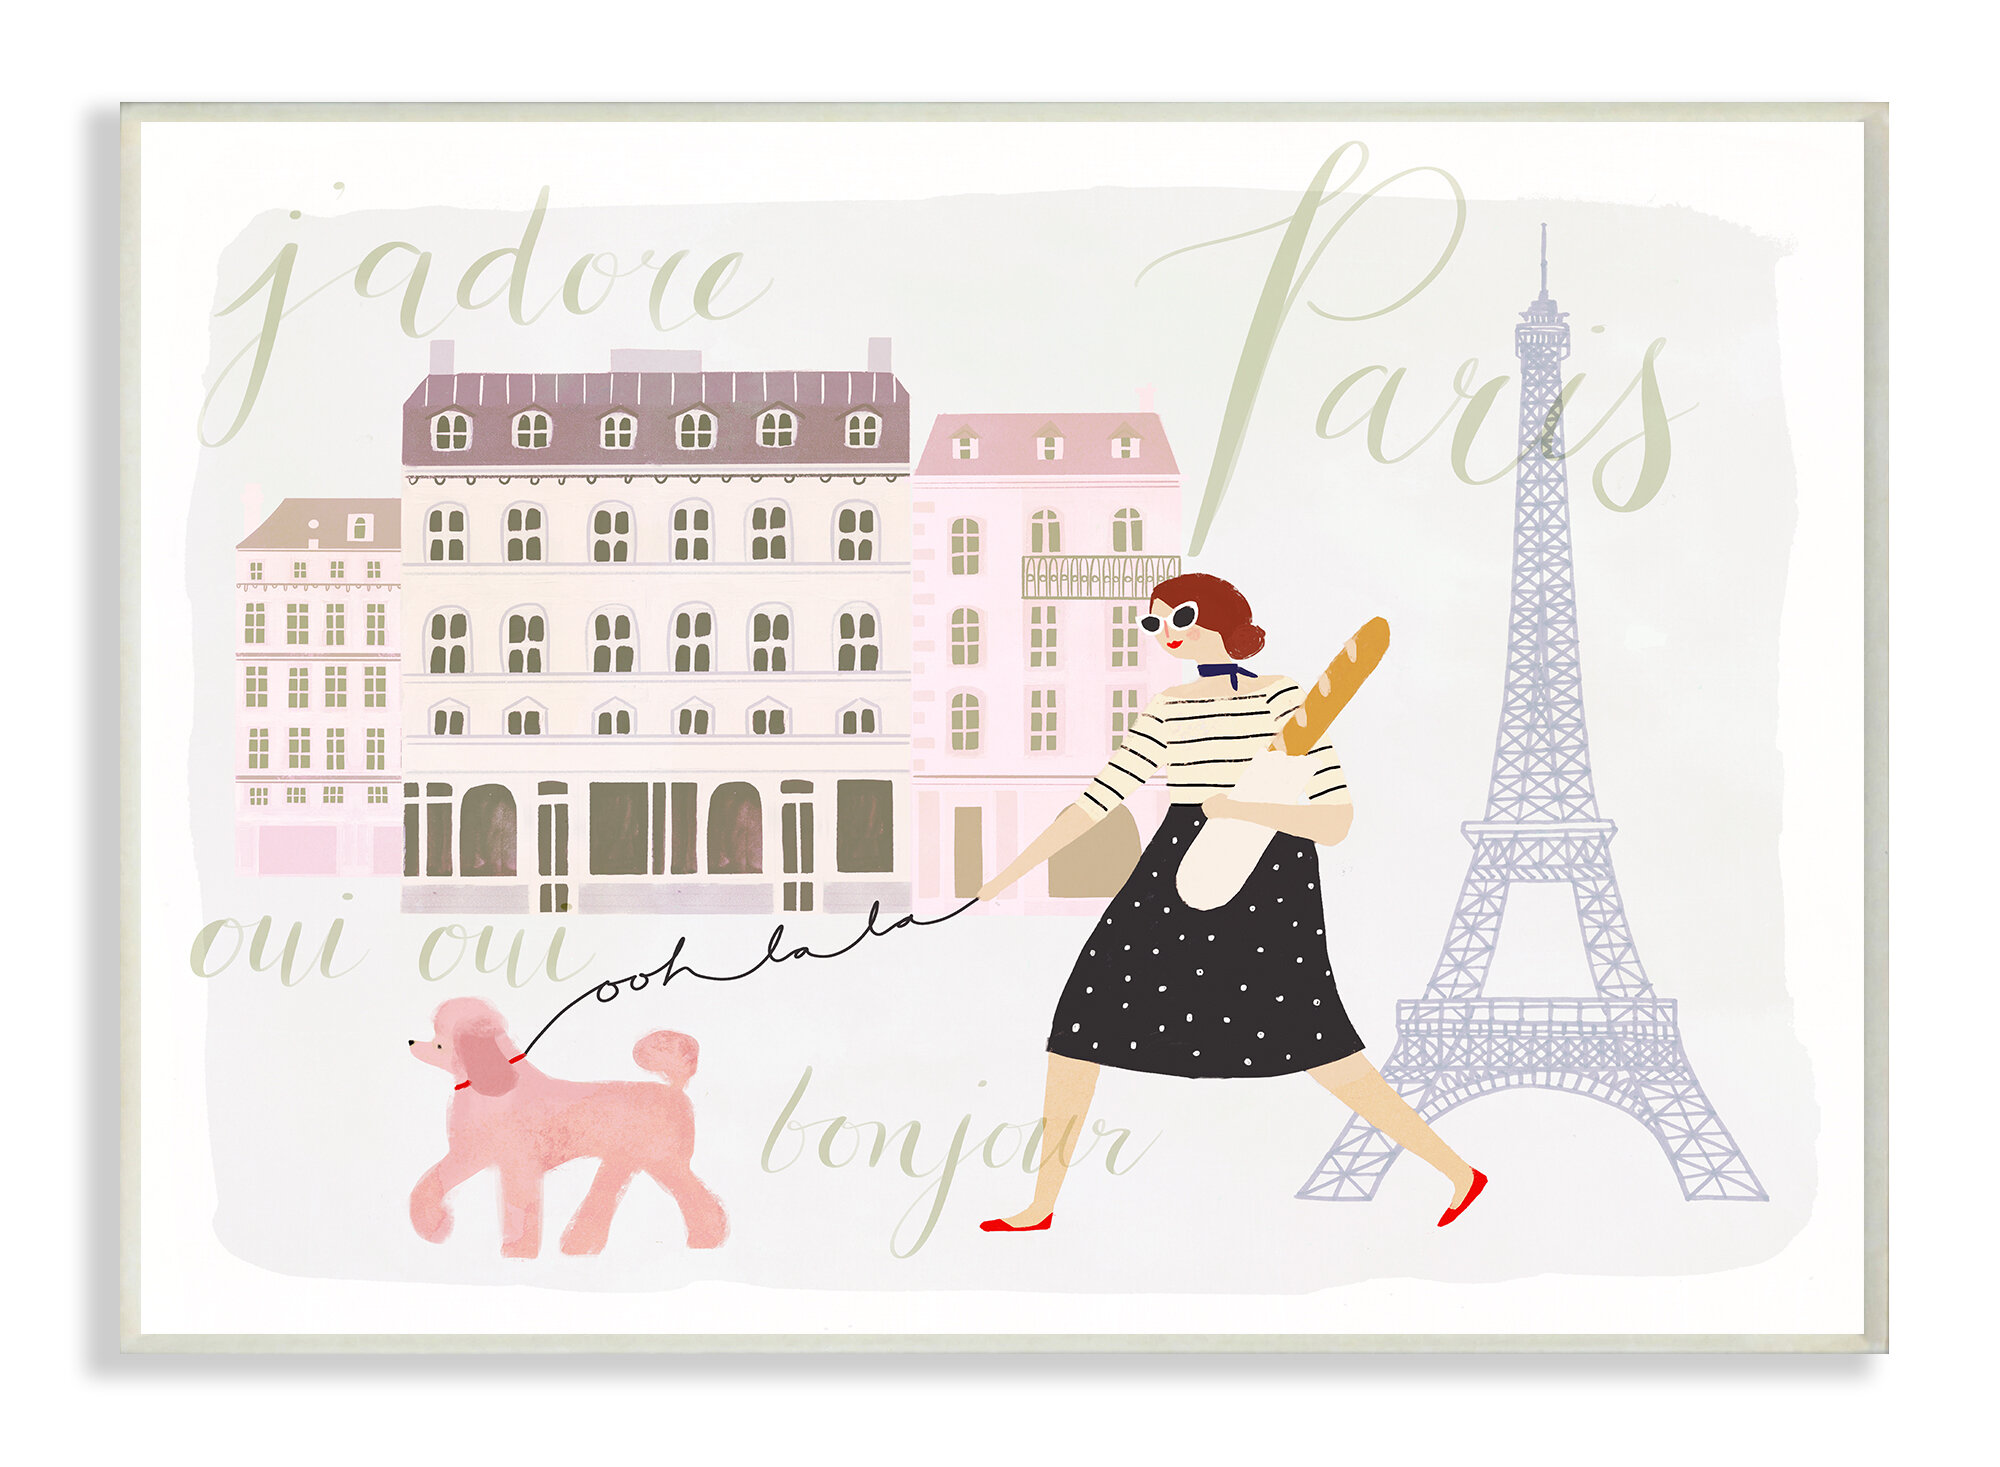 Eiffel Tower Scene Paris Girl Walking Her Dog with Typography' Graphic Art Print House of Hampton Format: Wall Plaque, Size: 12 H x 18.5 W x 0.5